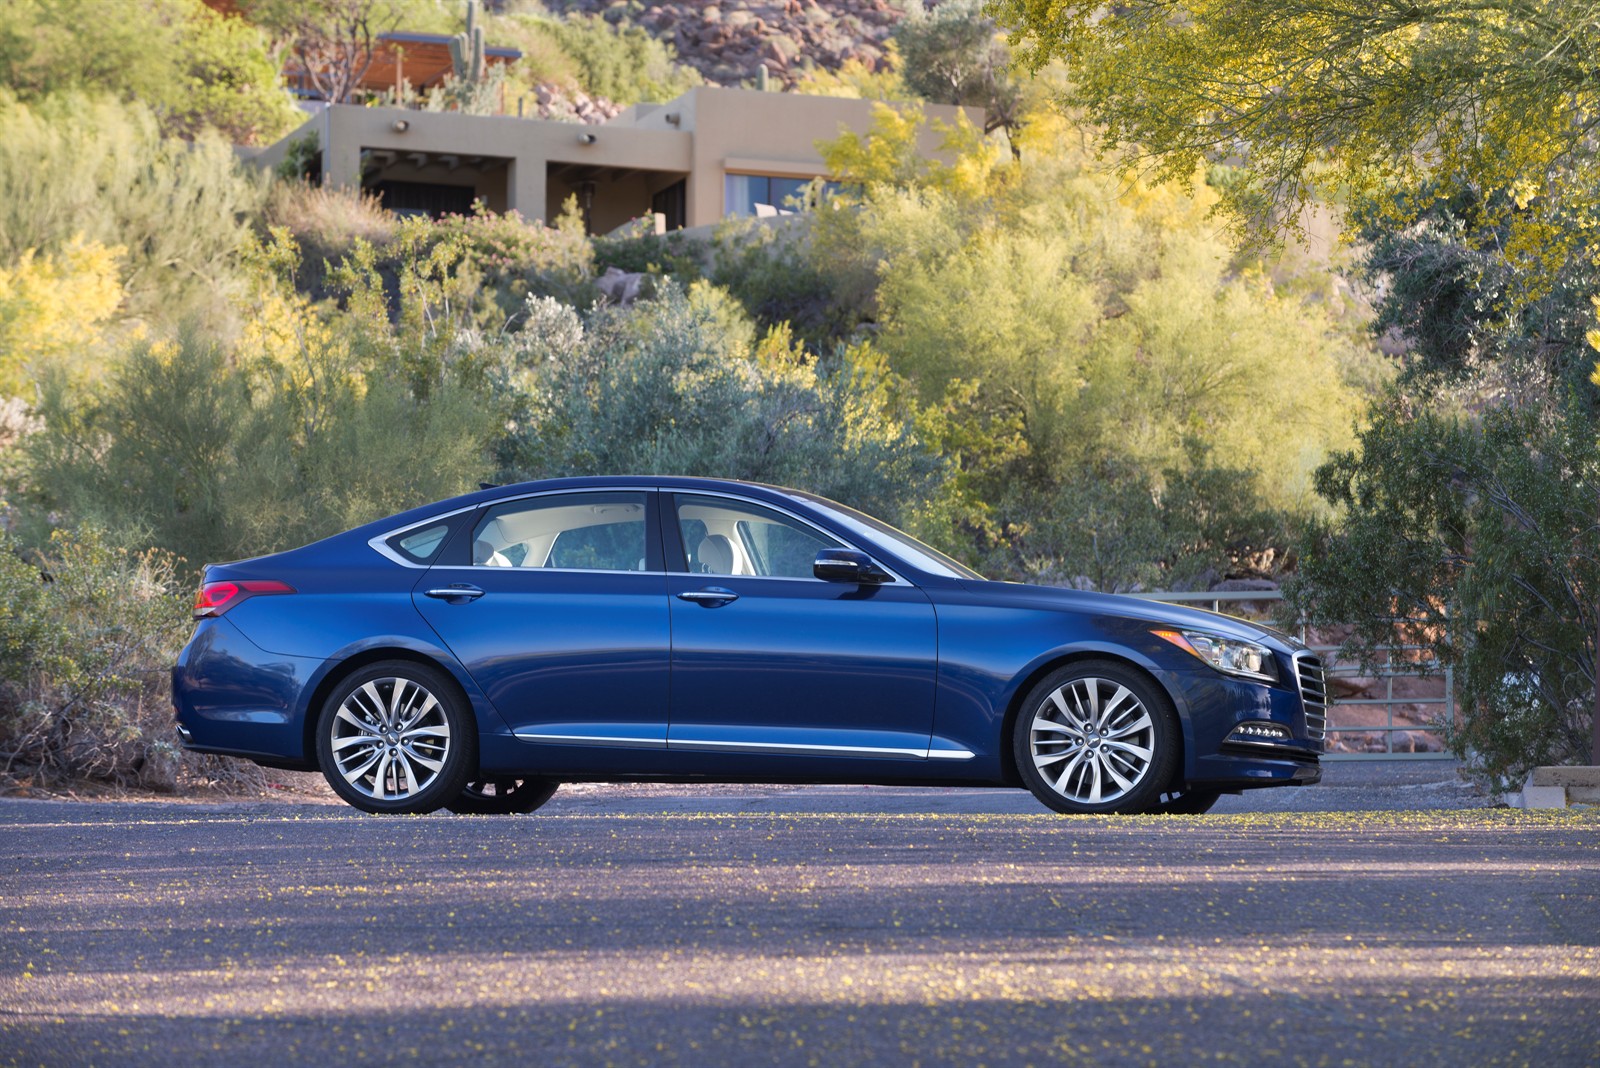 All-New Hyundai Genesis Finalist for 2015 North American Car of the Year